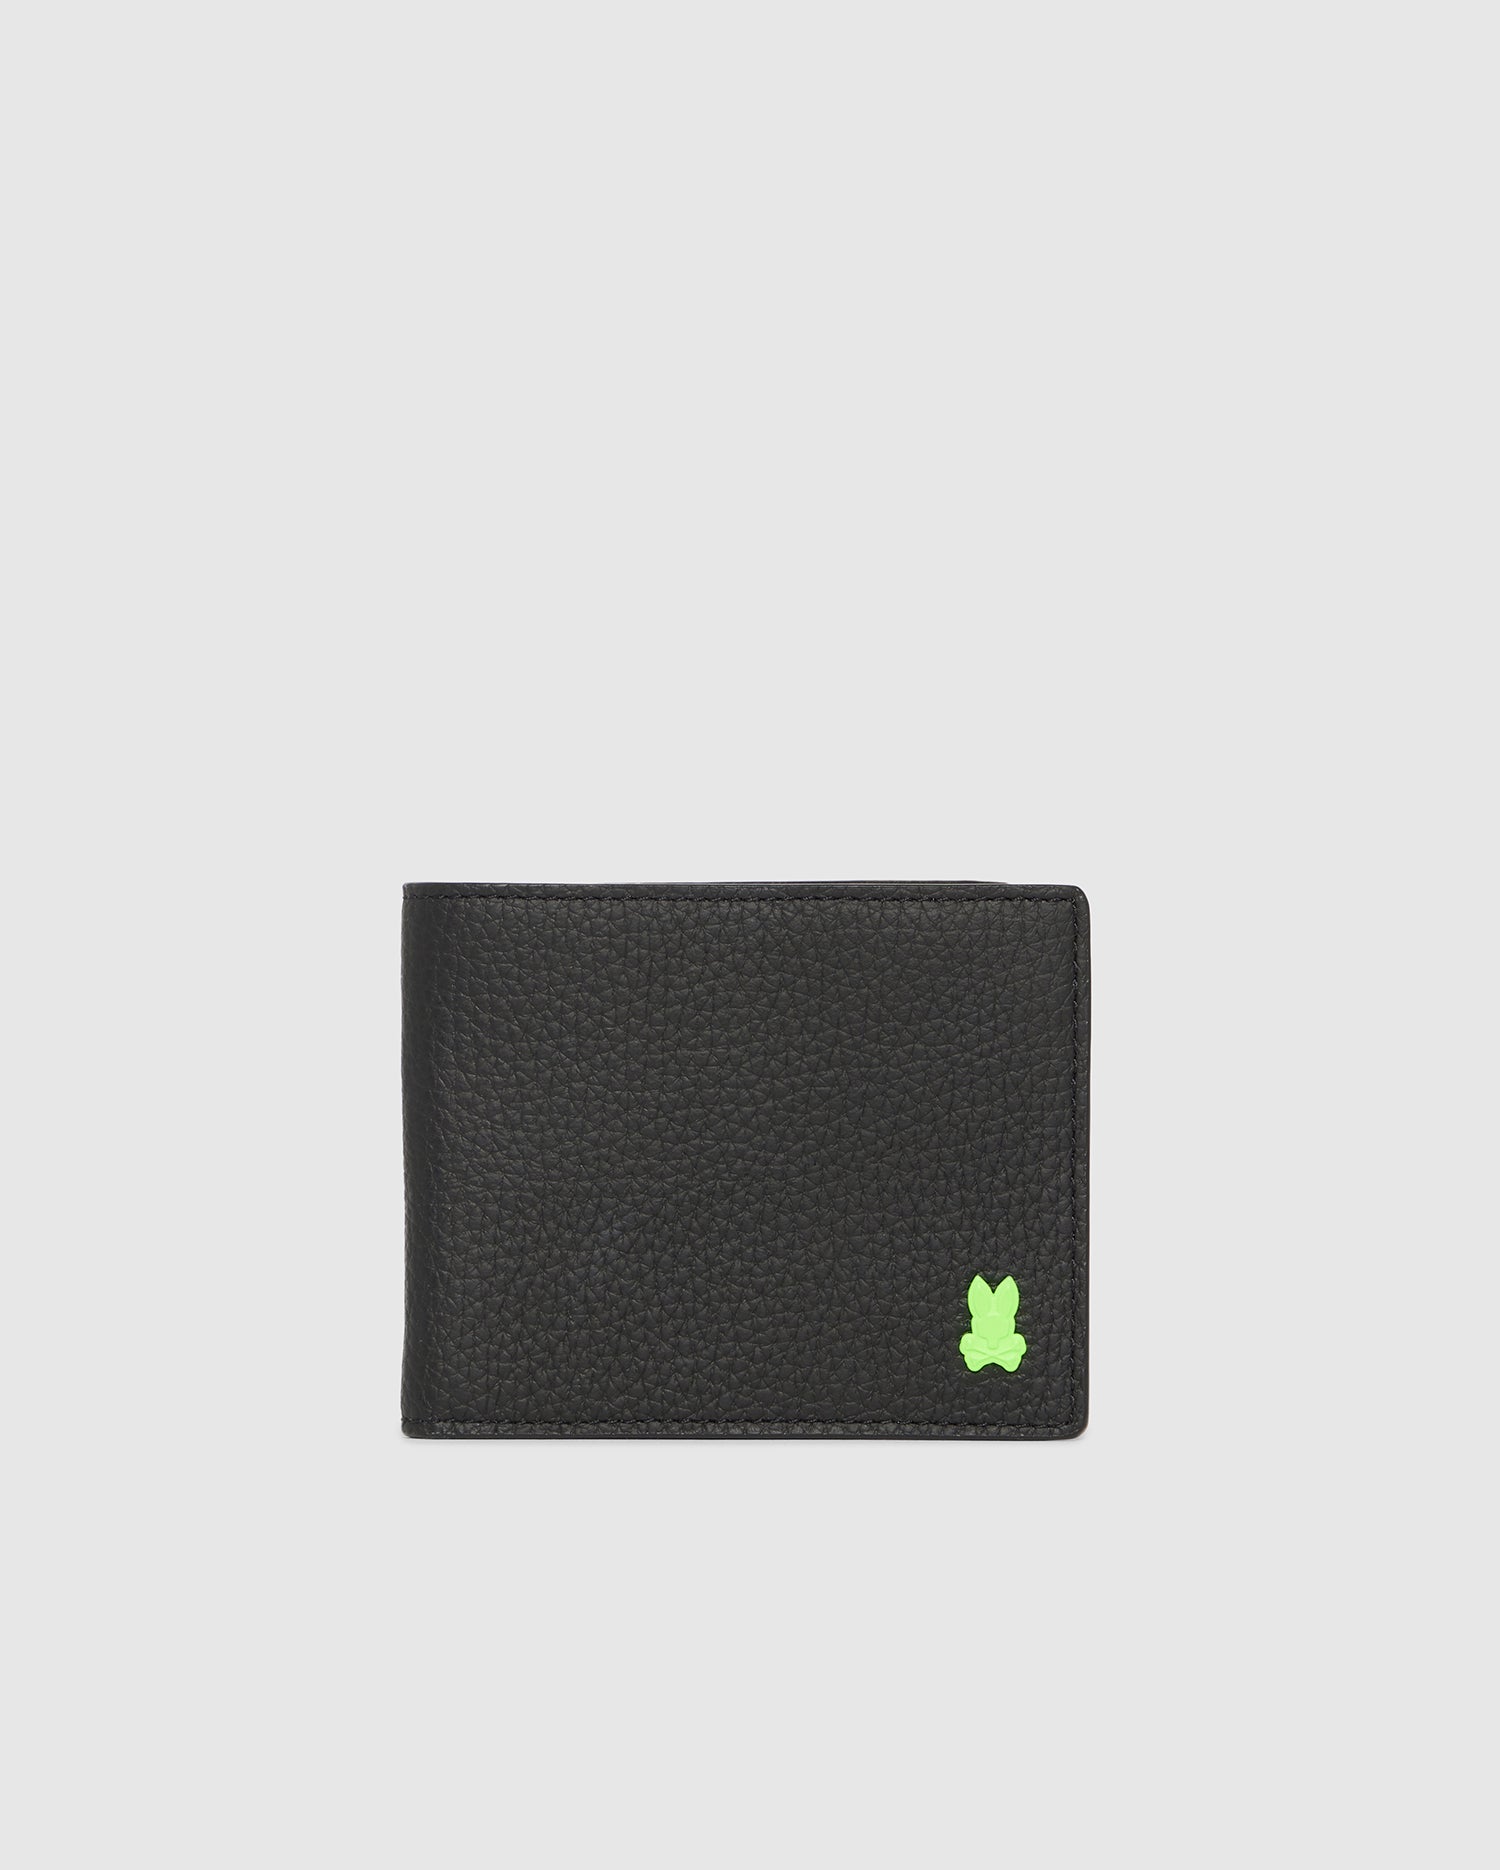 Psycho Bunny MENS WALLET - B6A403B200 with a small, green clover logo on the bottom right corner, displayed against a white background.